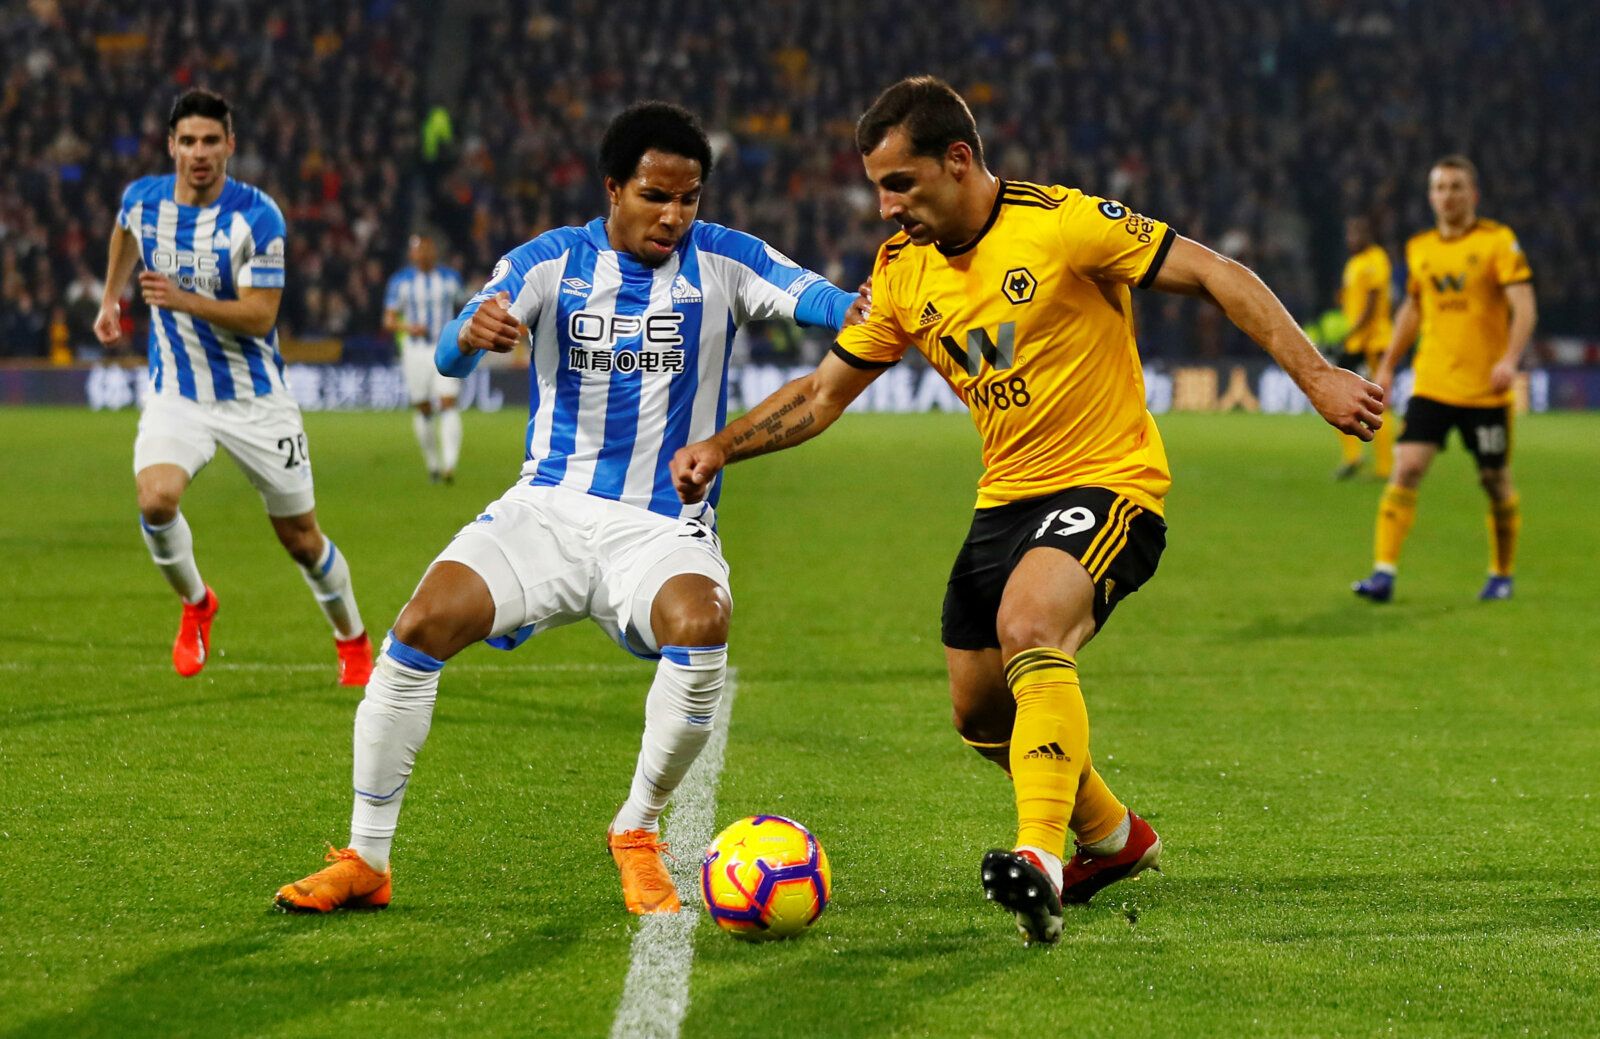 Soccer Football - Premier League - Huddersfield Town v Wolverhampton Wanderers - John Smith's Stadium, Huddersfield, Britain - February 26, 2019  Huddersfield Town's Demeaco Duhaney in action with Wolverhampton Wanderers' Jonny Castro          Action Images via Reuters/Jason Cairnduff  EDITORIAL USE ONLY. No use with unauthorized audio, video, data, fixture lists, club/league logos or 